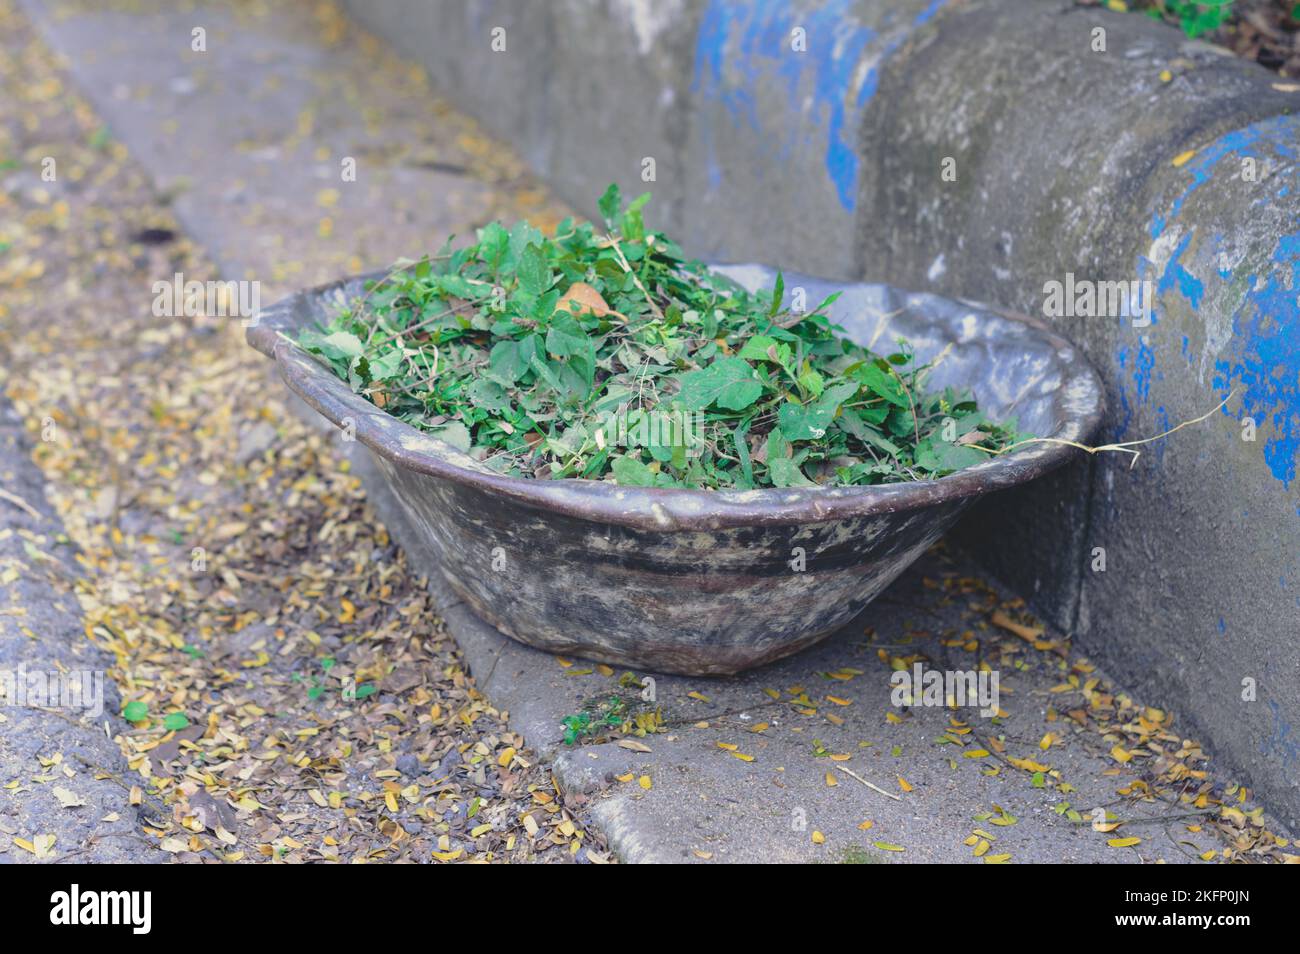 Compost Heap of Waste Leaves Picking Up after Clean and gathered in a Garbage Dump Container for Recycling. Natural Waste Management Recycled Material Stock Photo